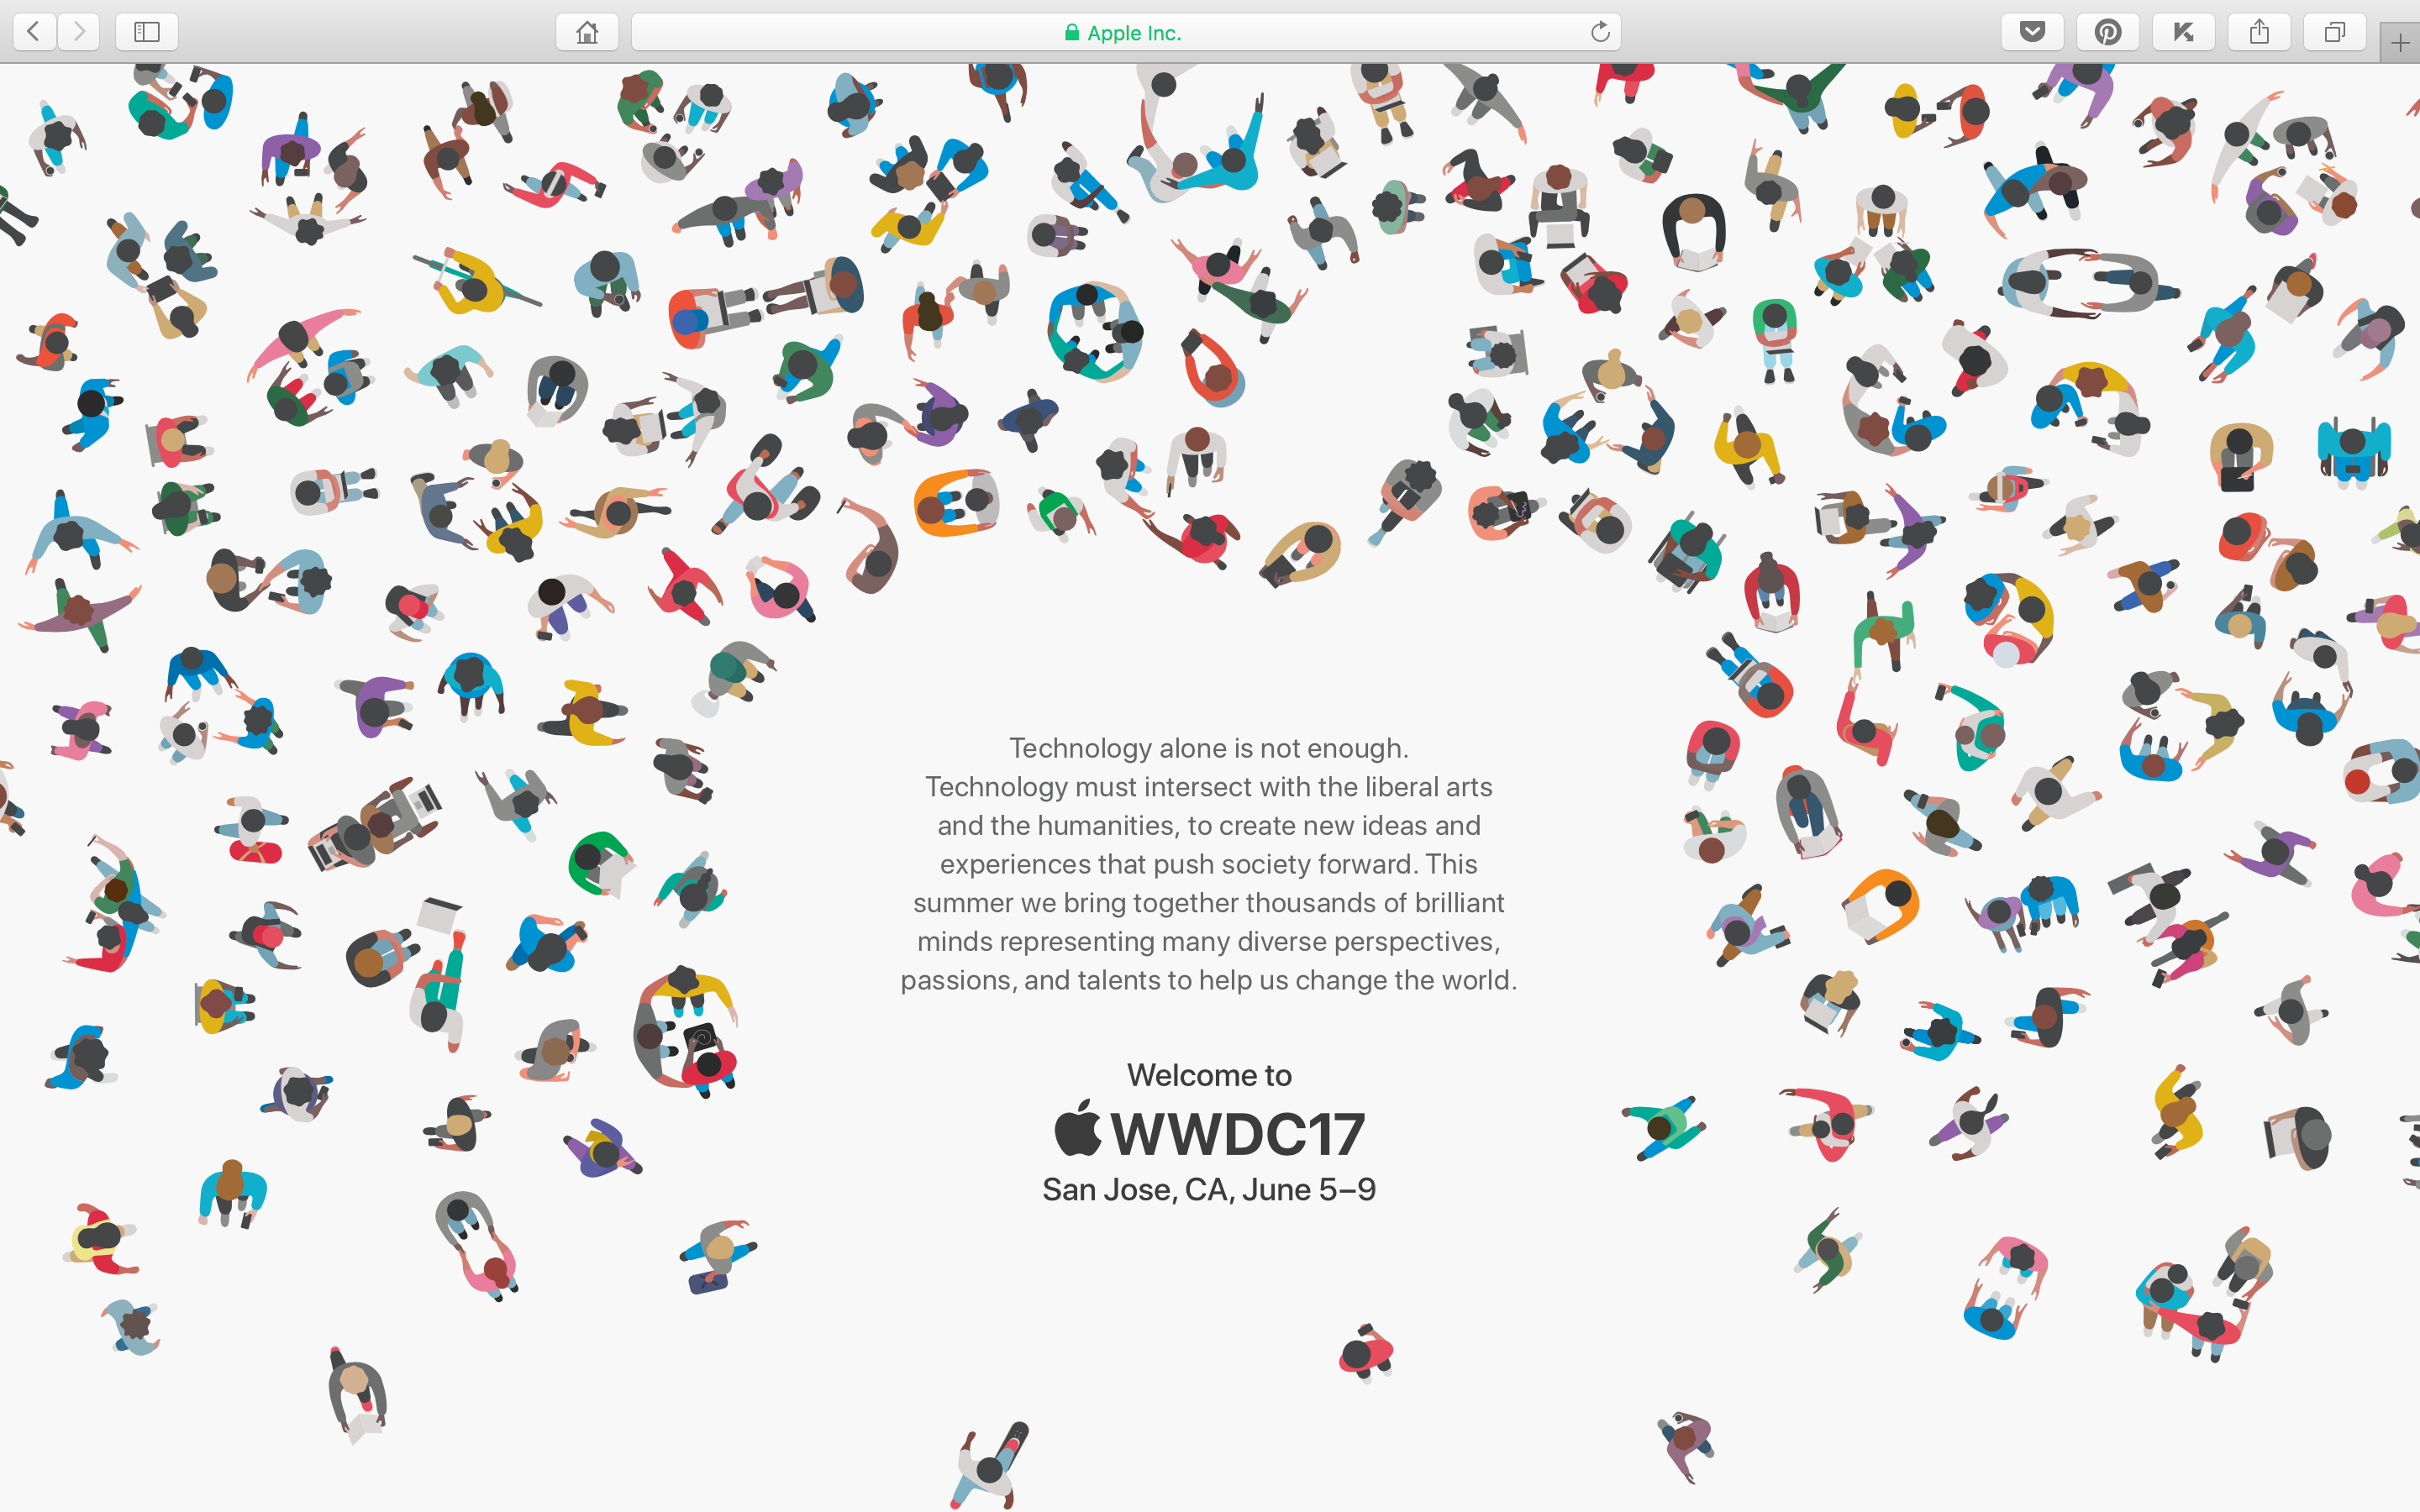 WWDC（WorldWide Developers Conference）2017